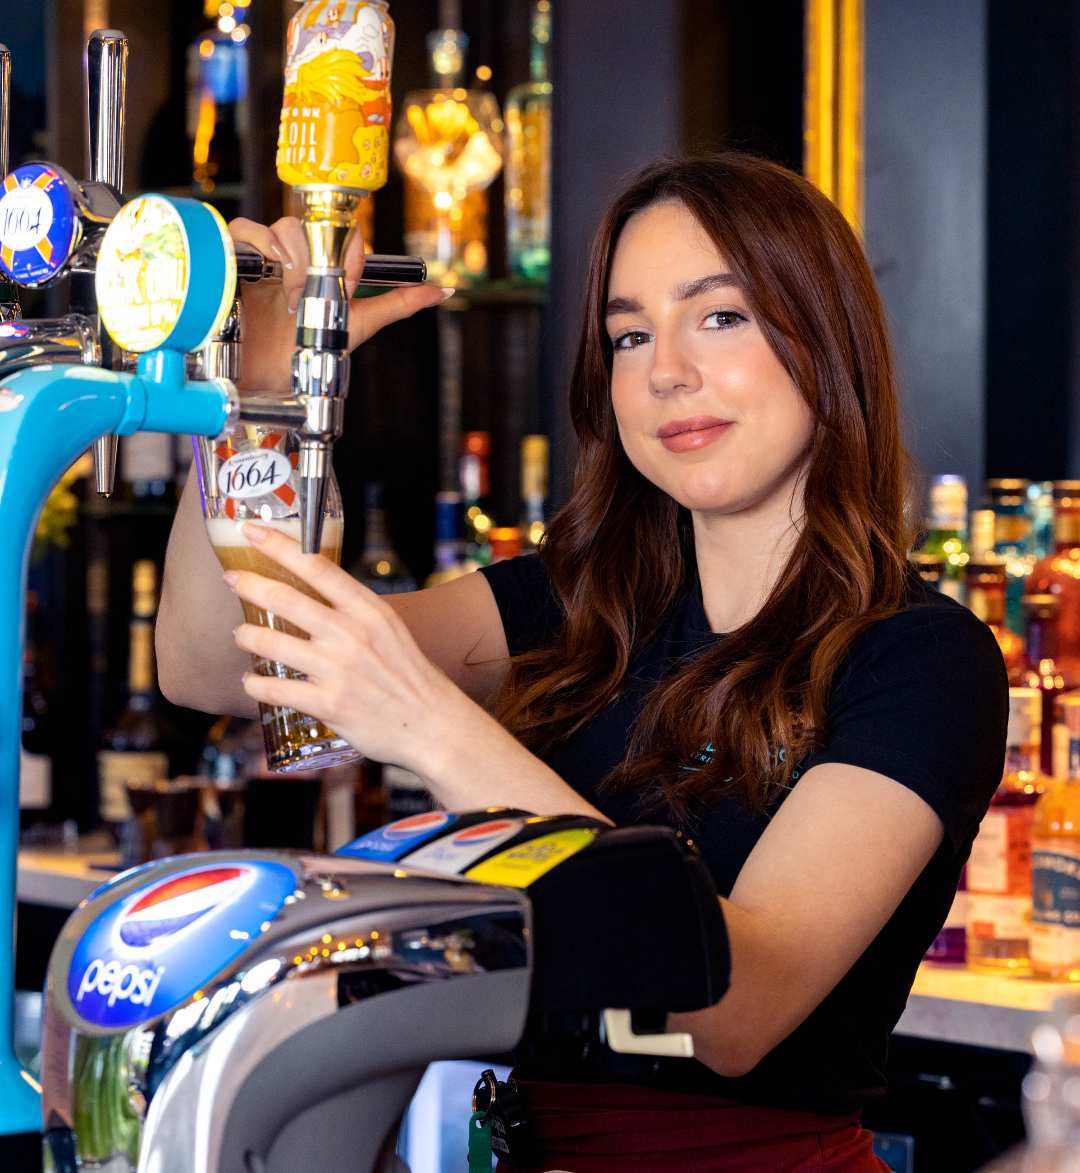 Barmaid pouring a fresh pint of 1664